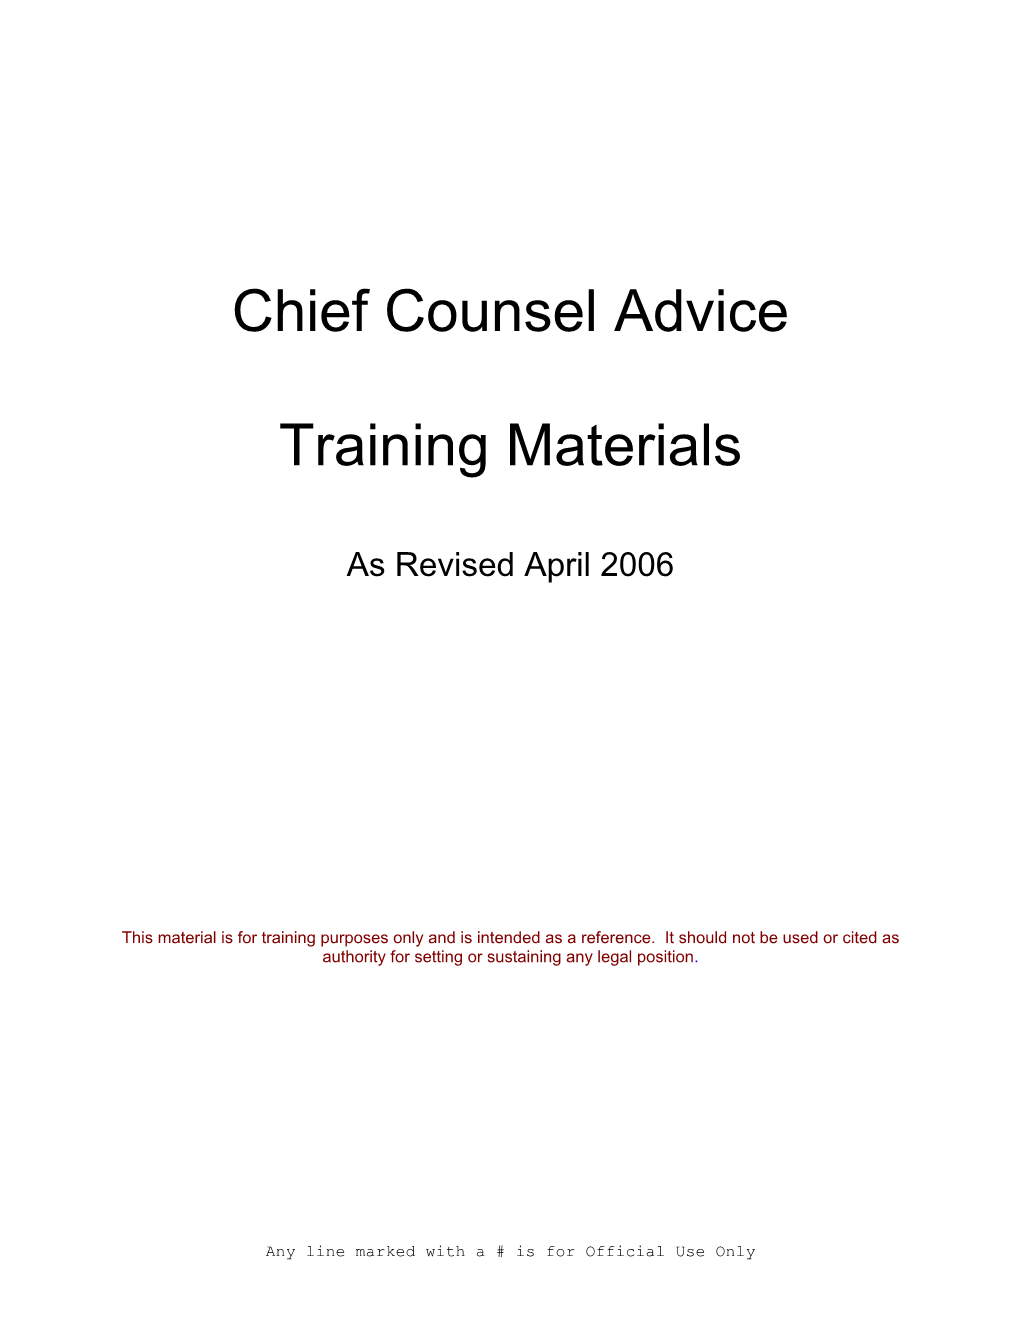 Chief Counsel Advice Training Materials